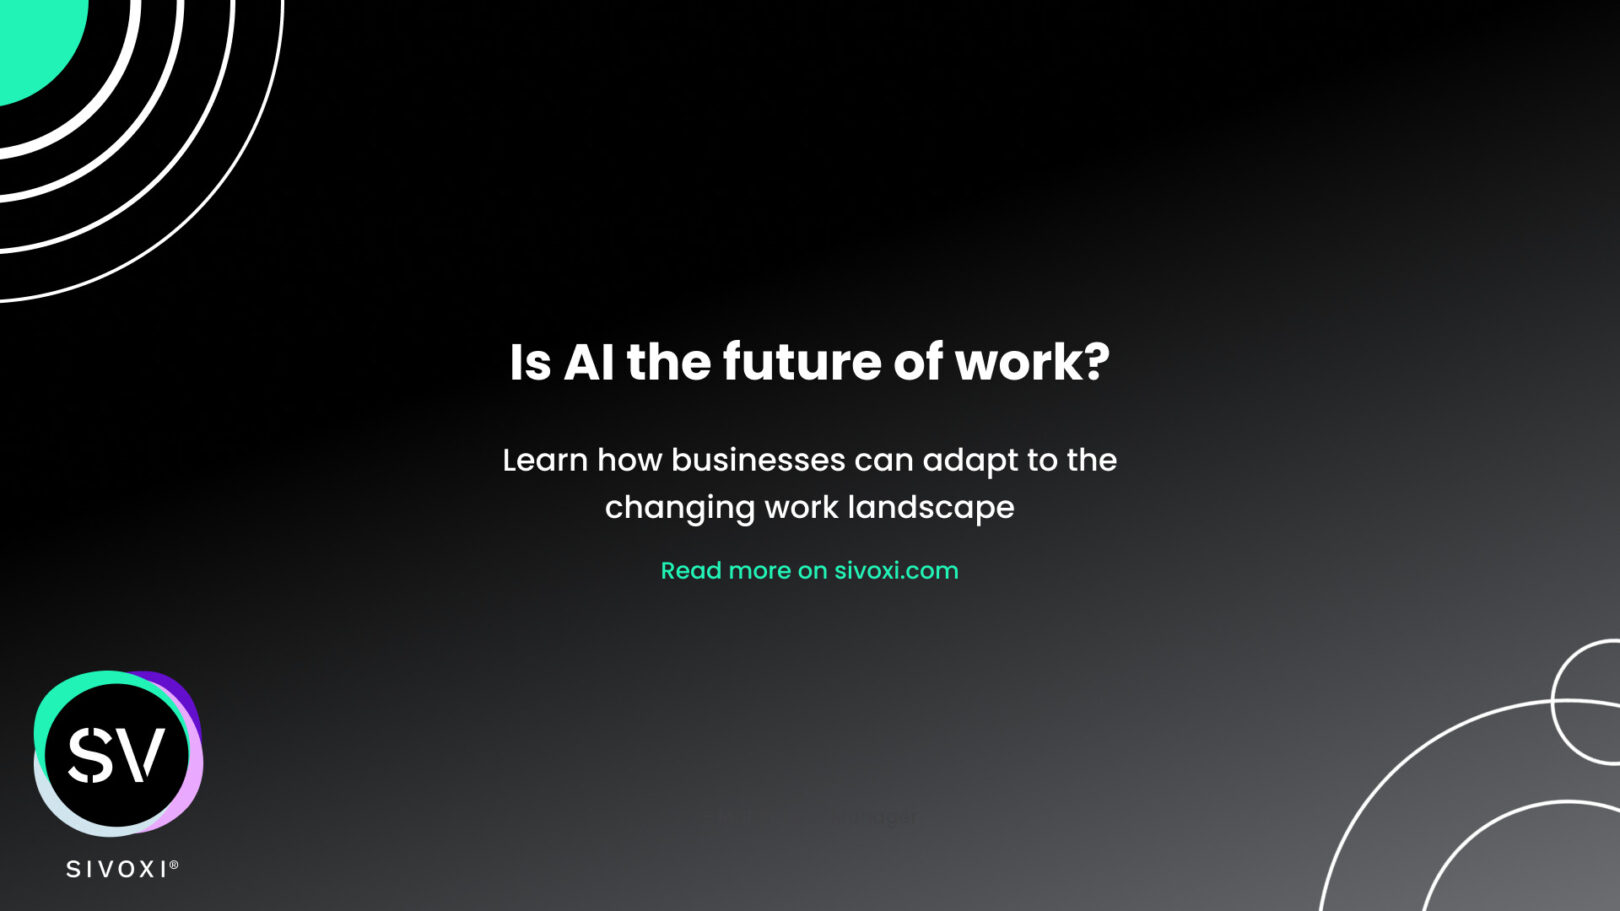 Is AI the future of work? Learn how businesses can adapt to the changing wokr landscape.